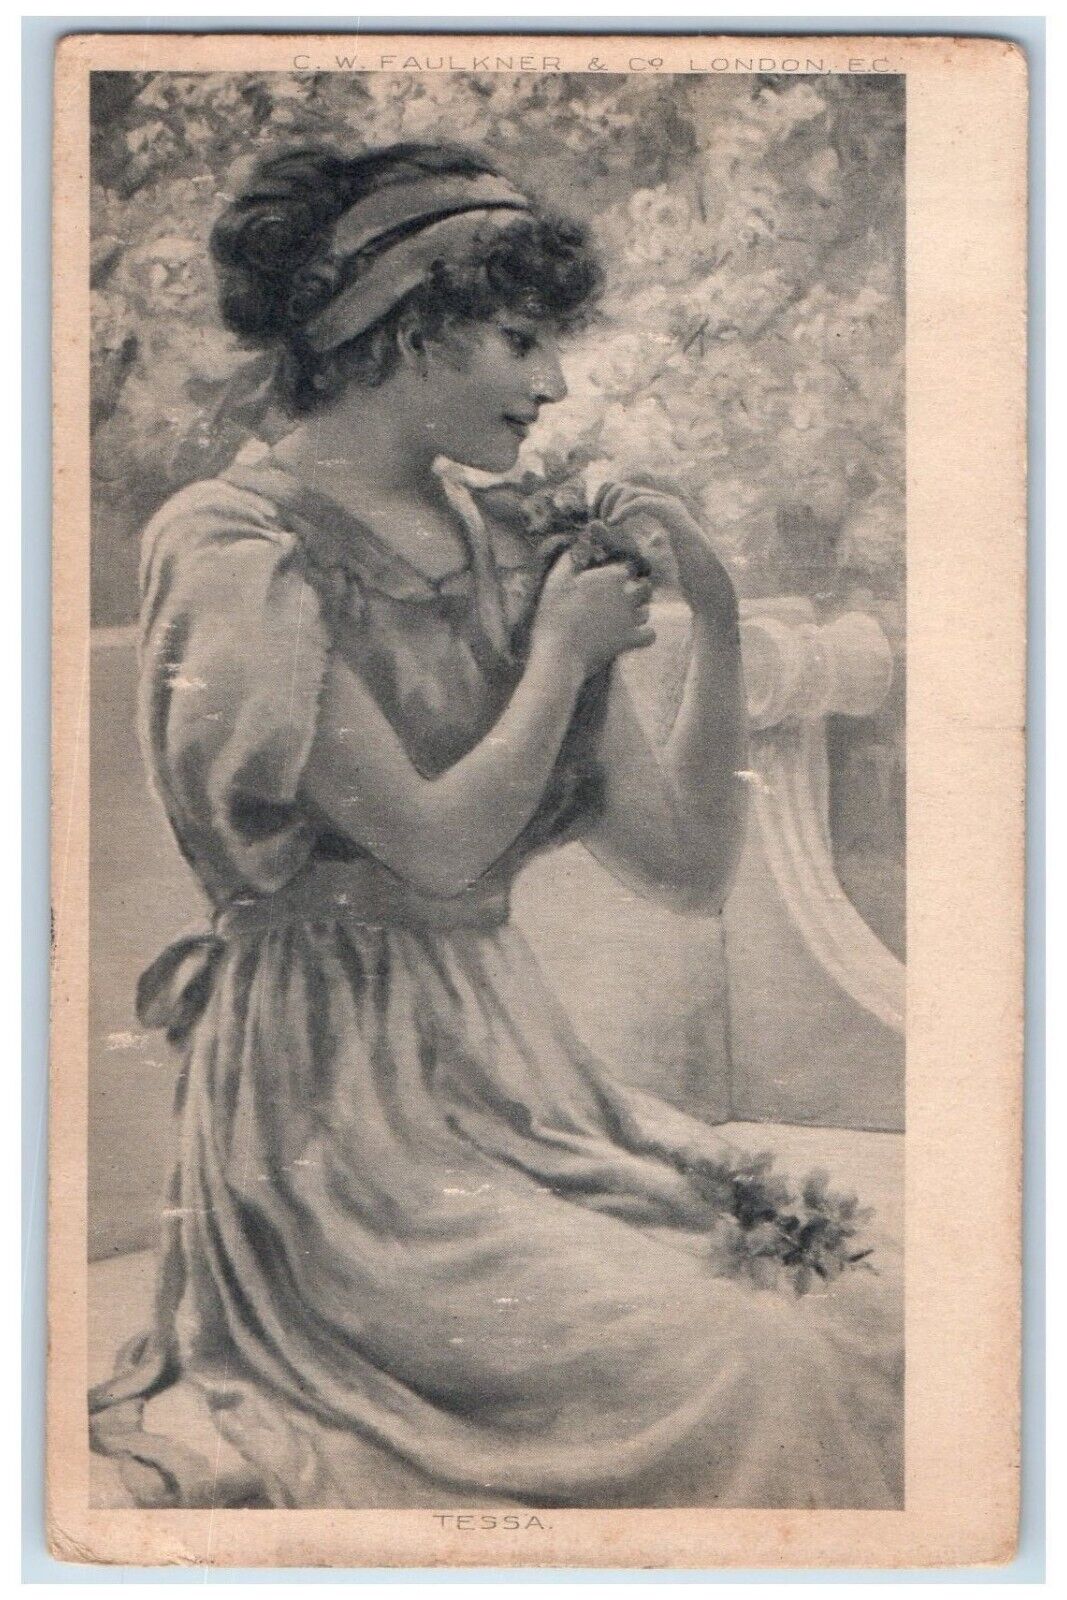 1907 Tessa Pretty Woman Dress Curly Hair Fixing Ribbon Posted Antique Postcard